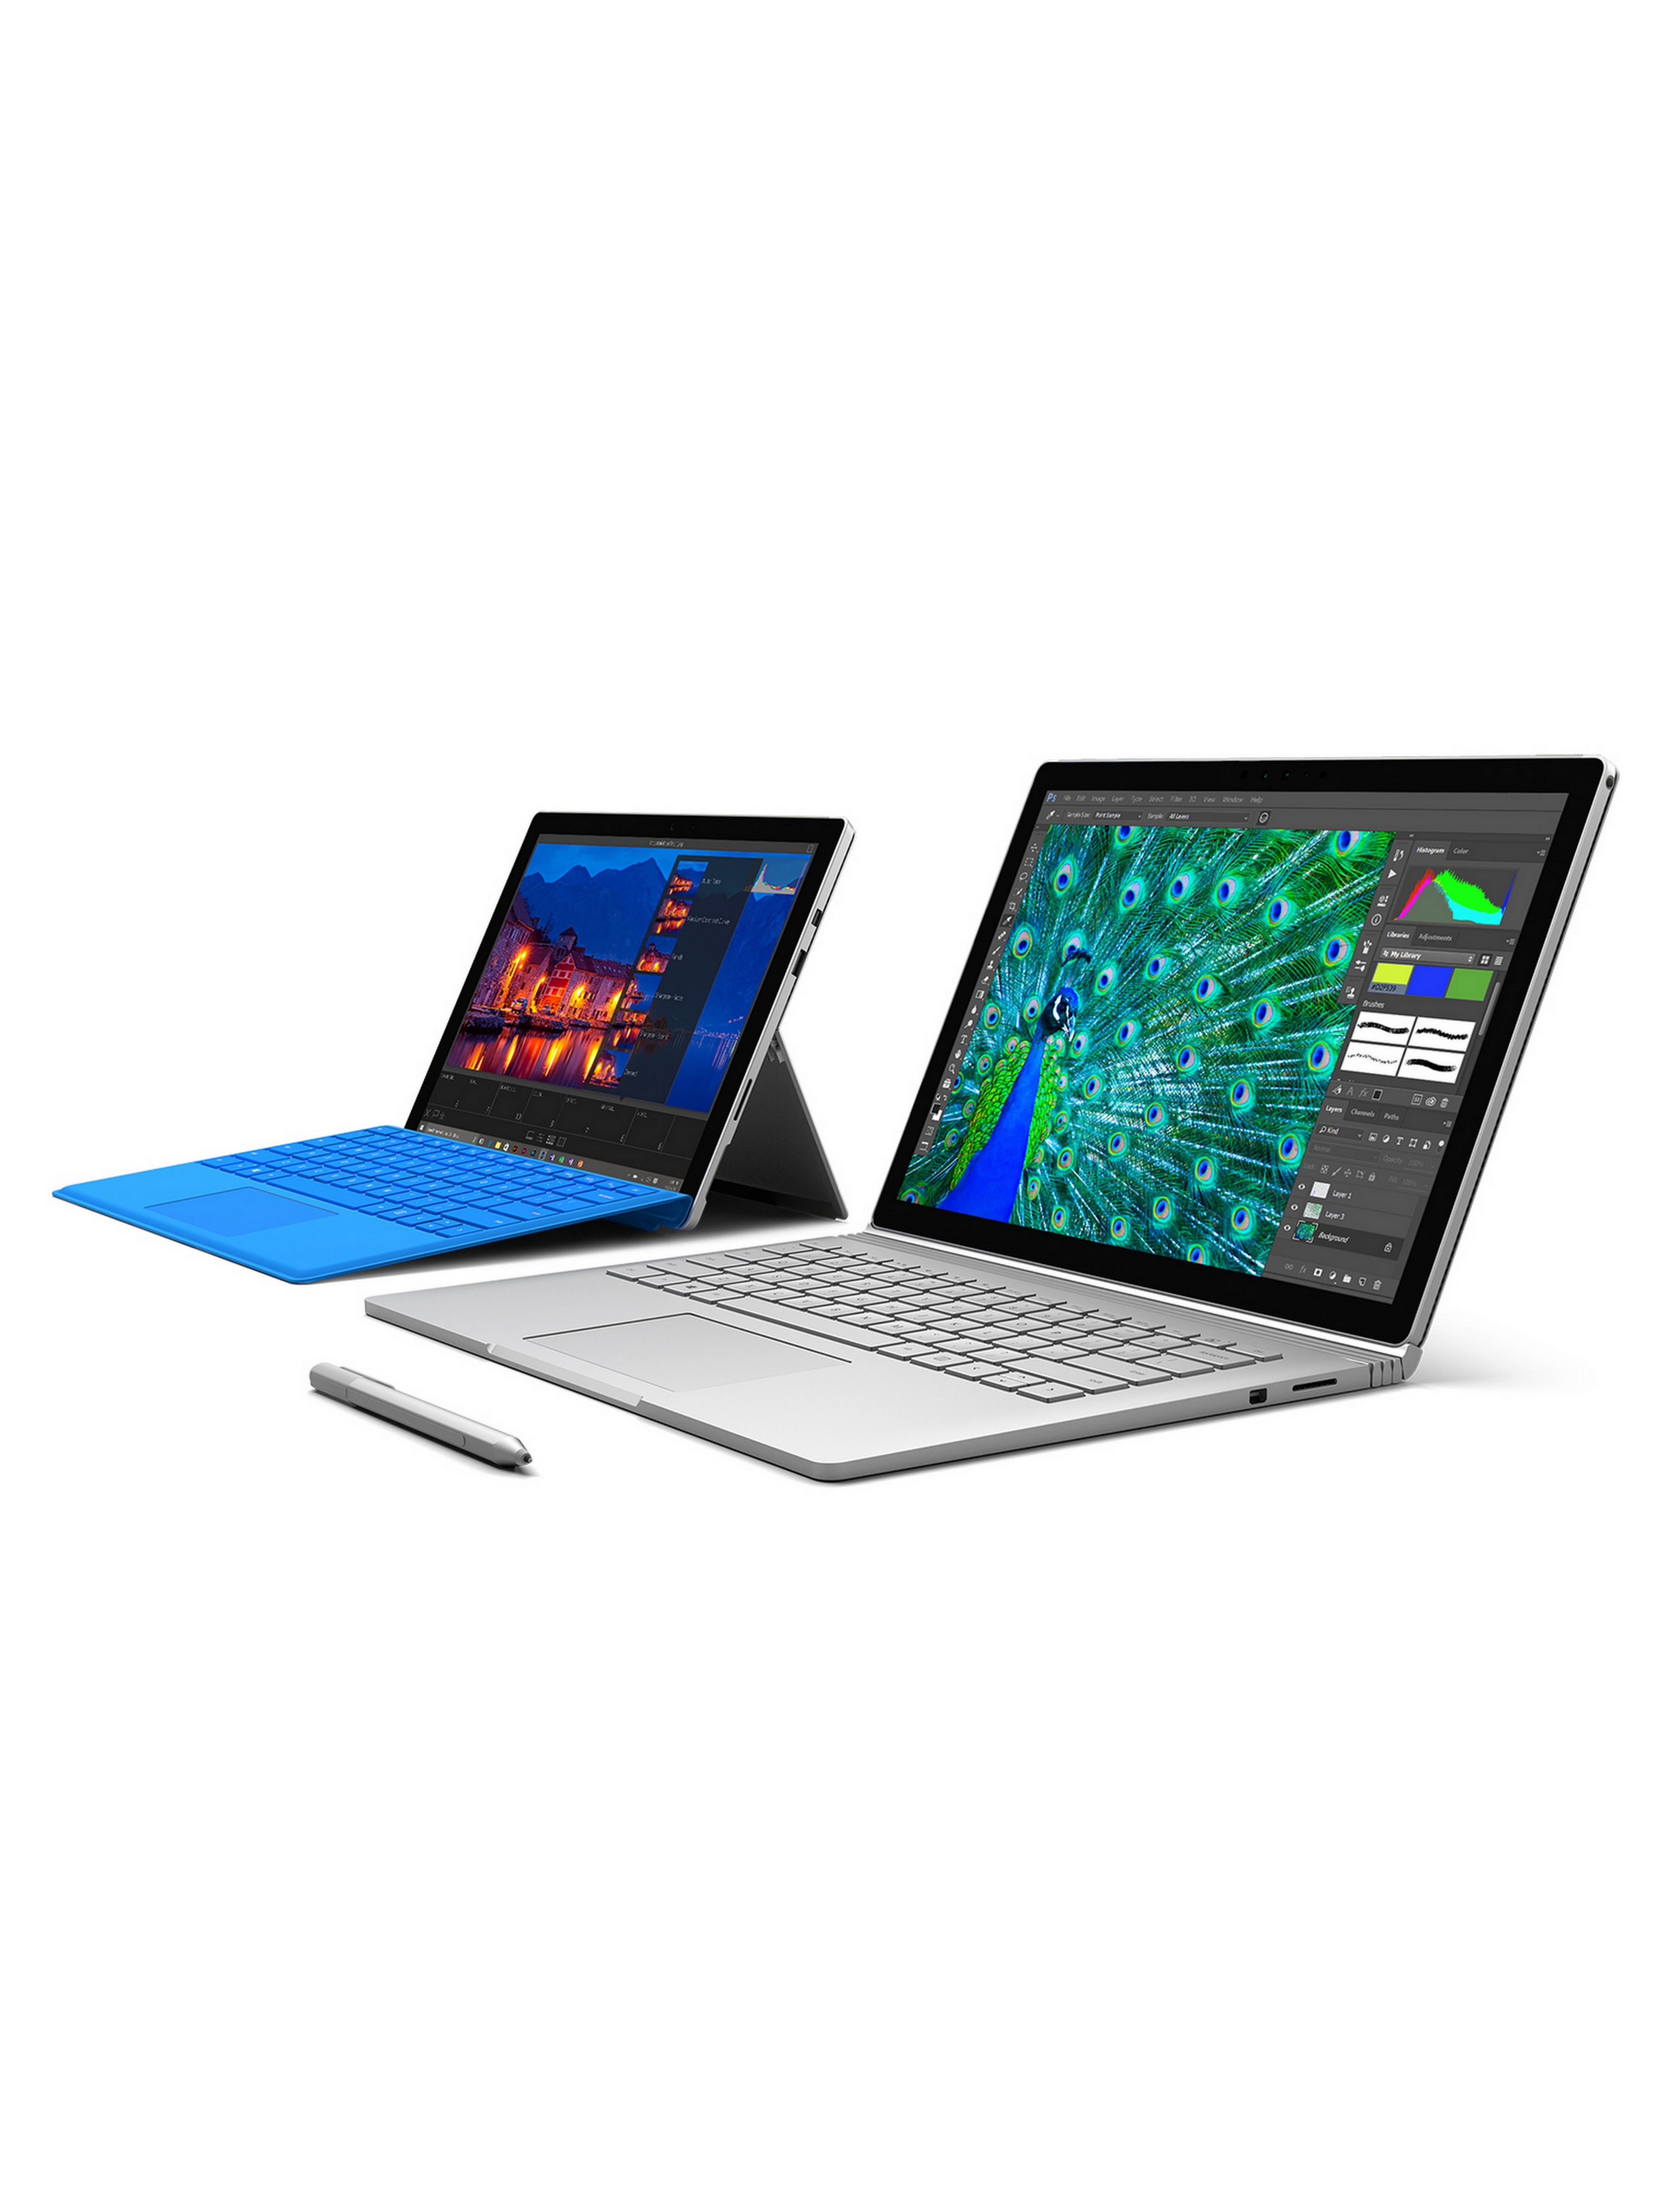 Side View of Surface Book and Surface Pro 4